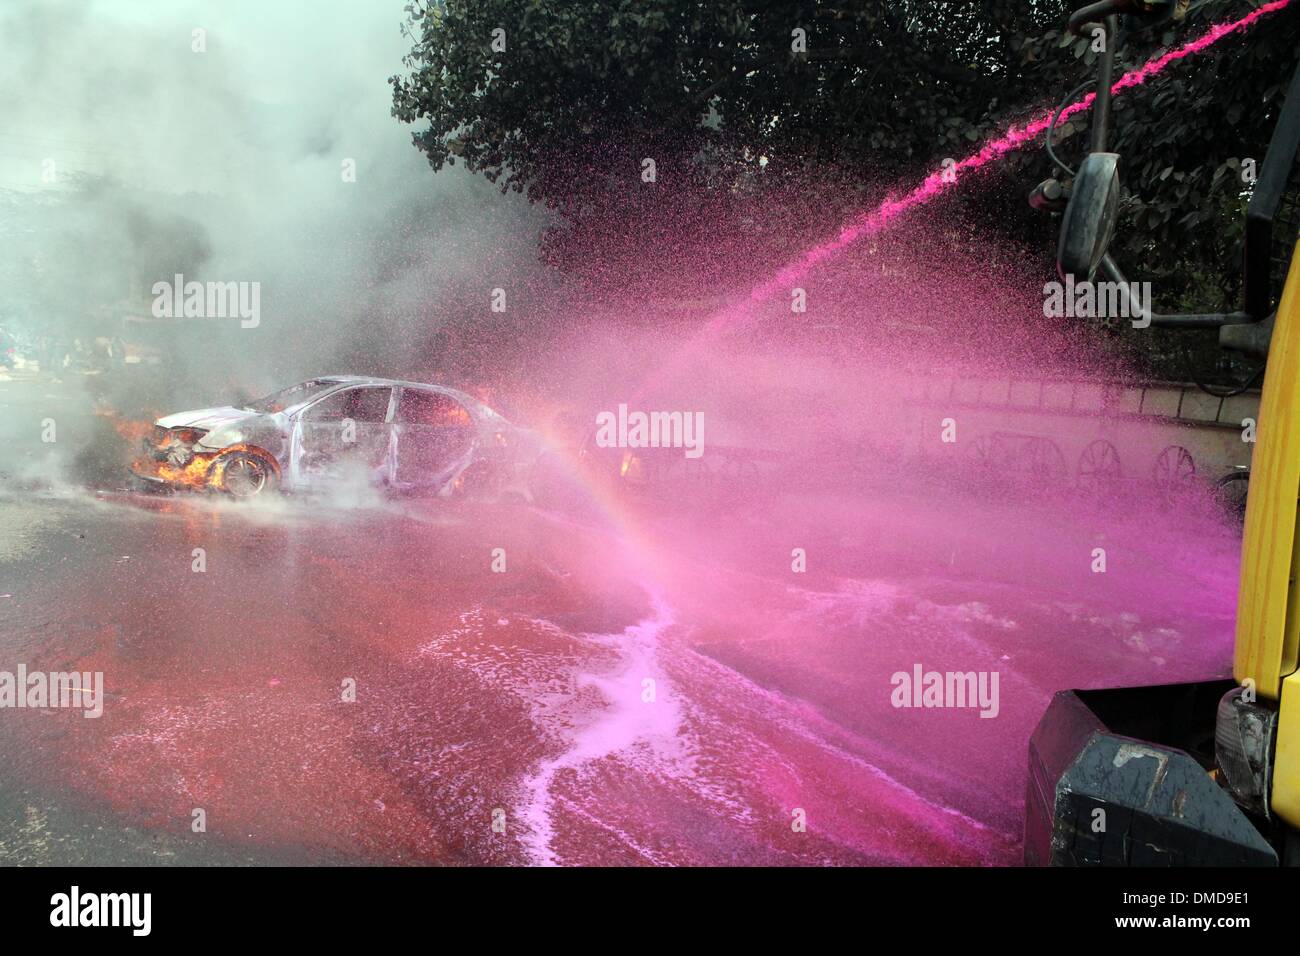 Dhaka, Bangladesh. 13th Dec, 2013. A police van sprays water to extinguish the fire set on by activists of Jamaat-e-Islami Party as they protested against the execution of their leader Abdul Quader Molla in Dhaka, Bangladesh, Dec. 13, 2013. Bangladesh has executed Abdul Quader Molla, an Islamist party leader convicted of war crimes in 1971, which is the first execution of a war criminal in the country. In protest against Molla's execution, his party Jamaat called countrywide dawn-to-dusk general strike for Sunday. Credit:  Shariful Islam/Xinhua/Alamy Live News Stock Photo